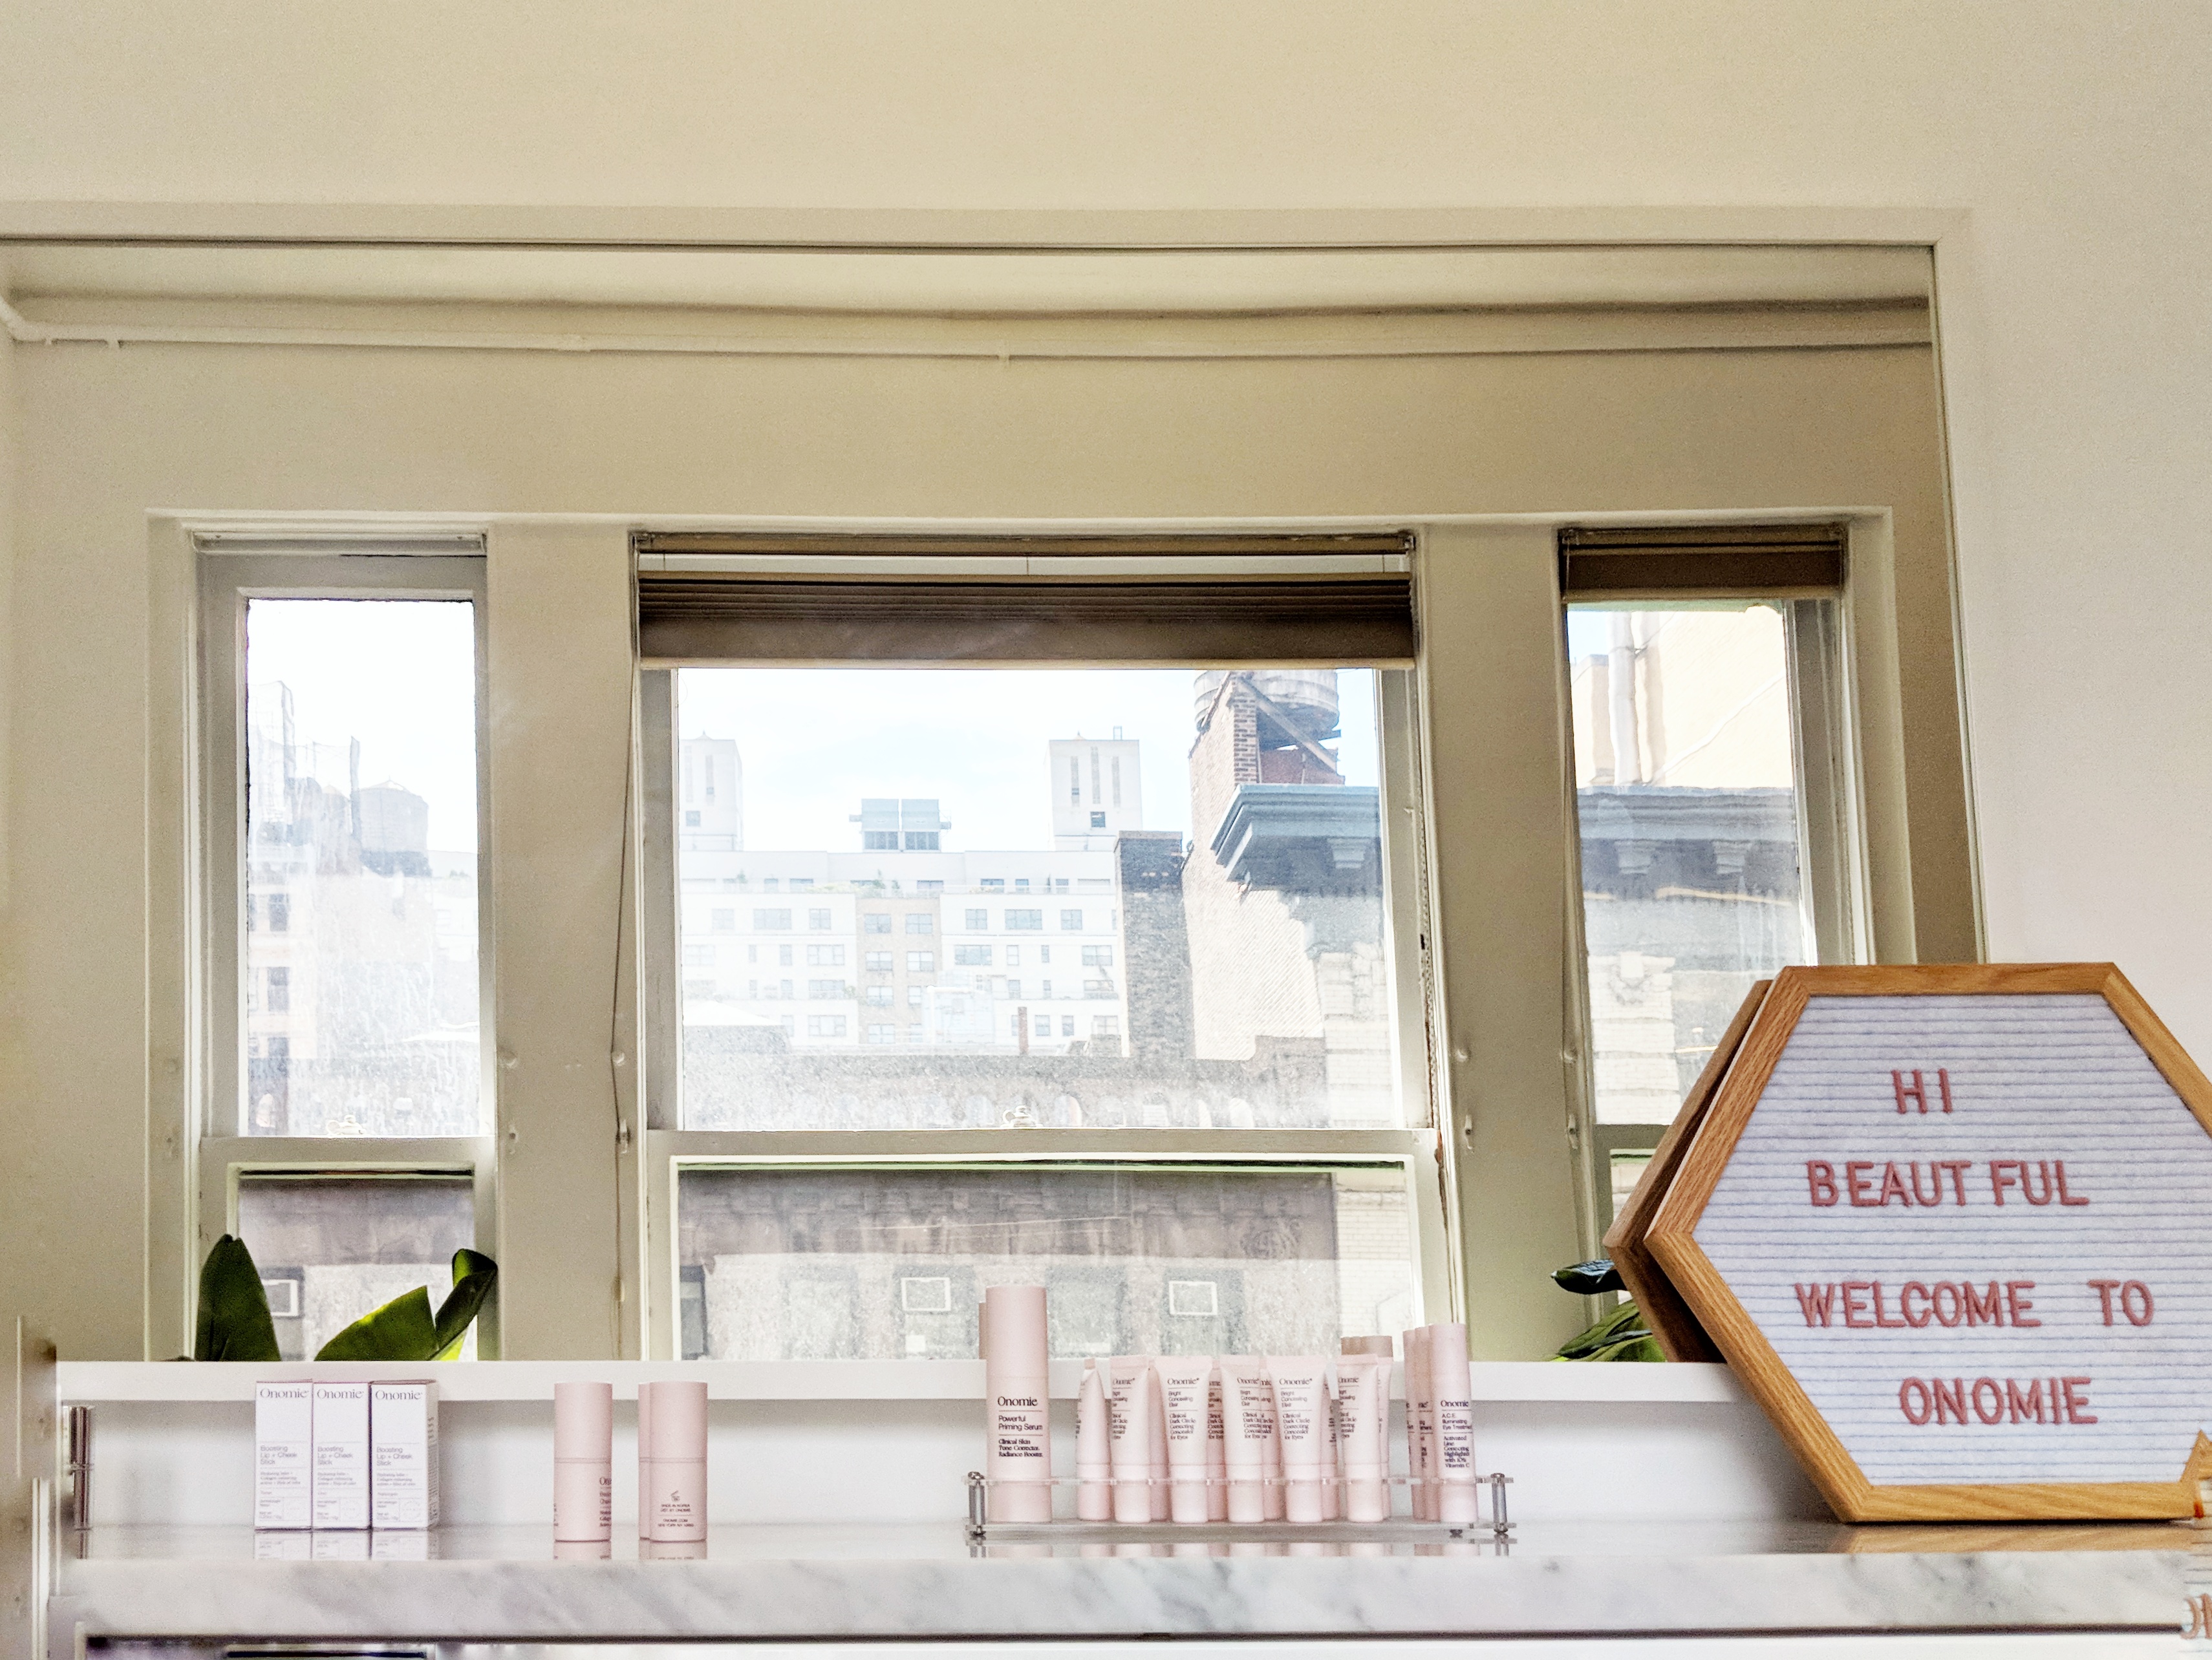 NYC Beauty Shopping Guide - Onomie